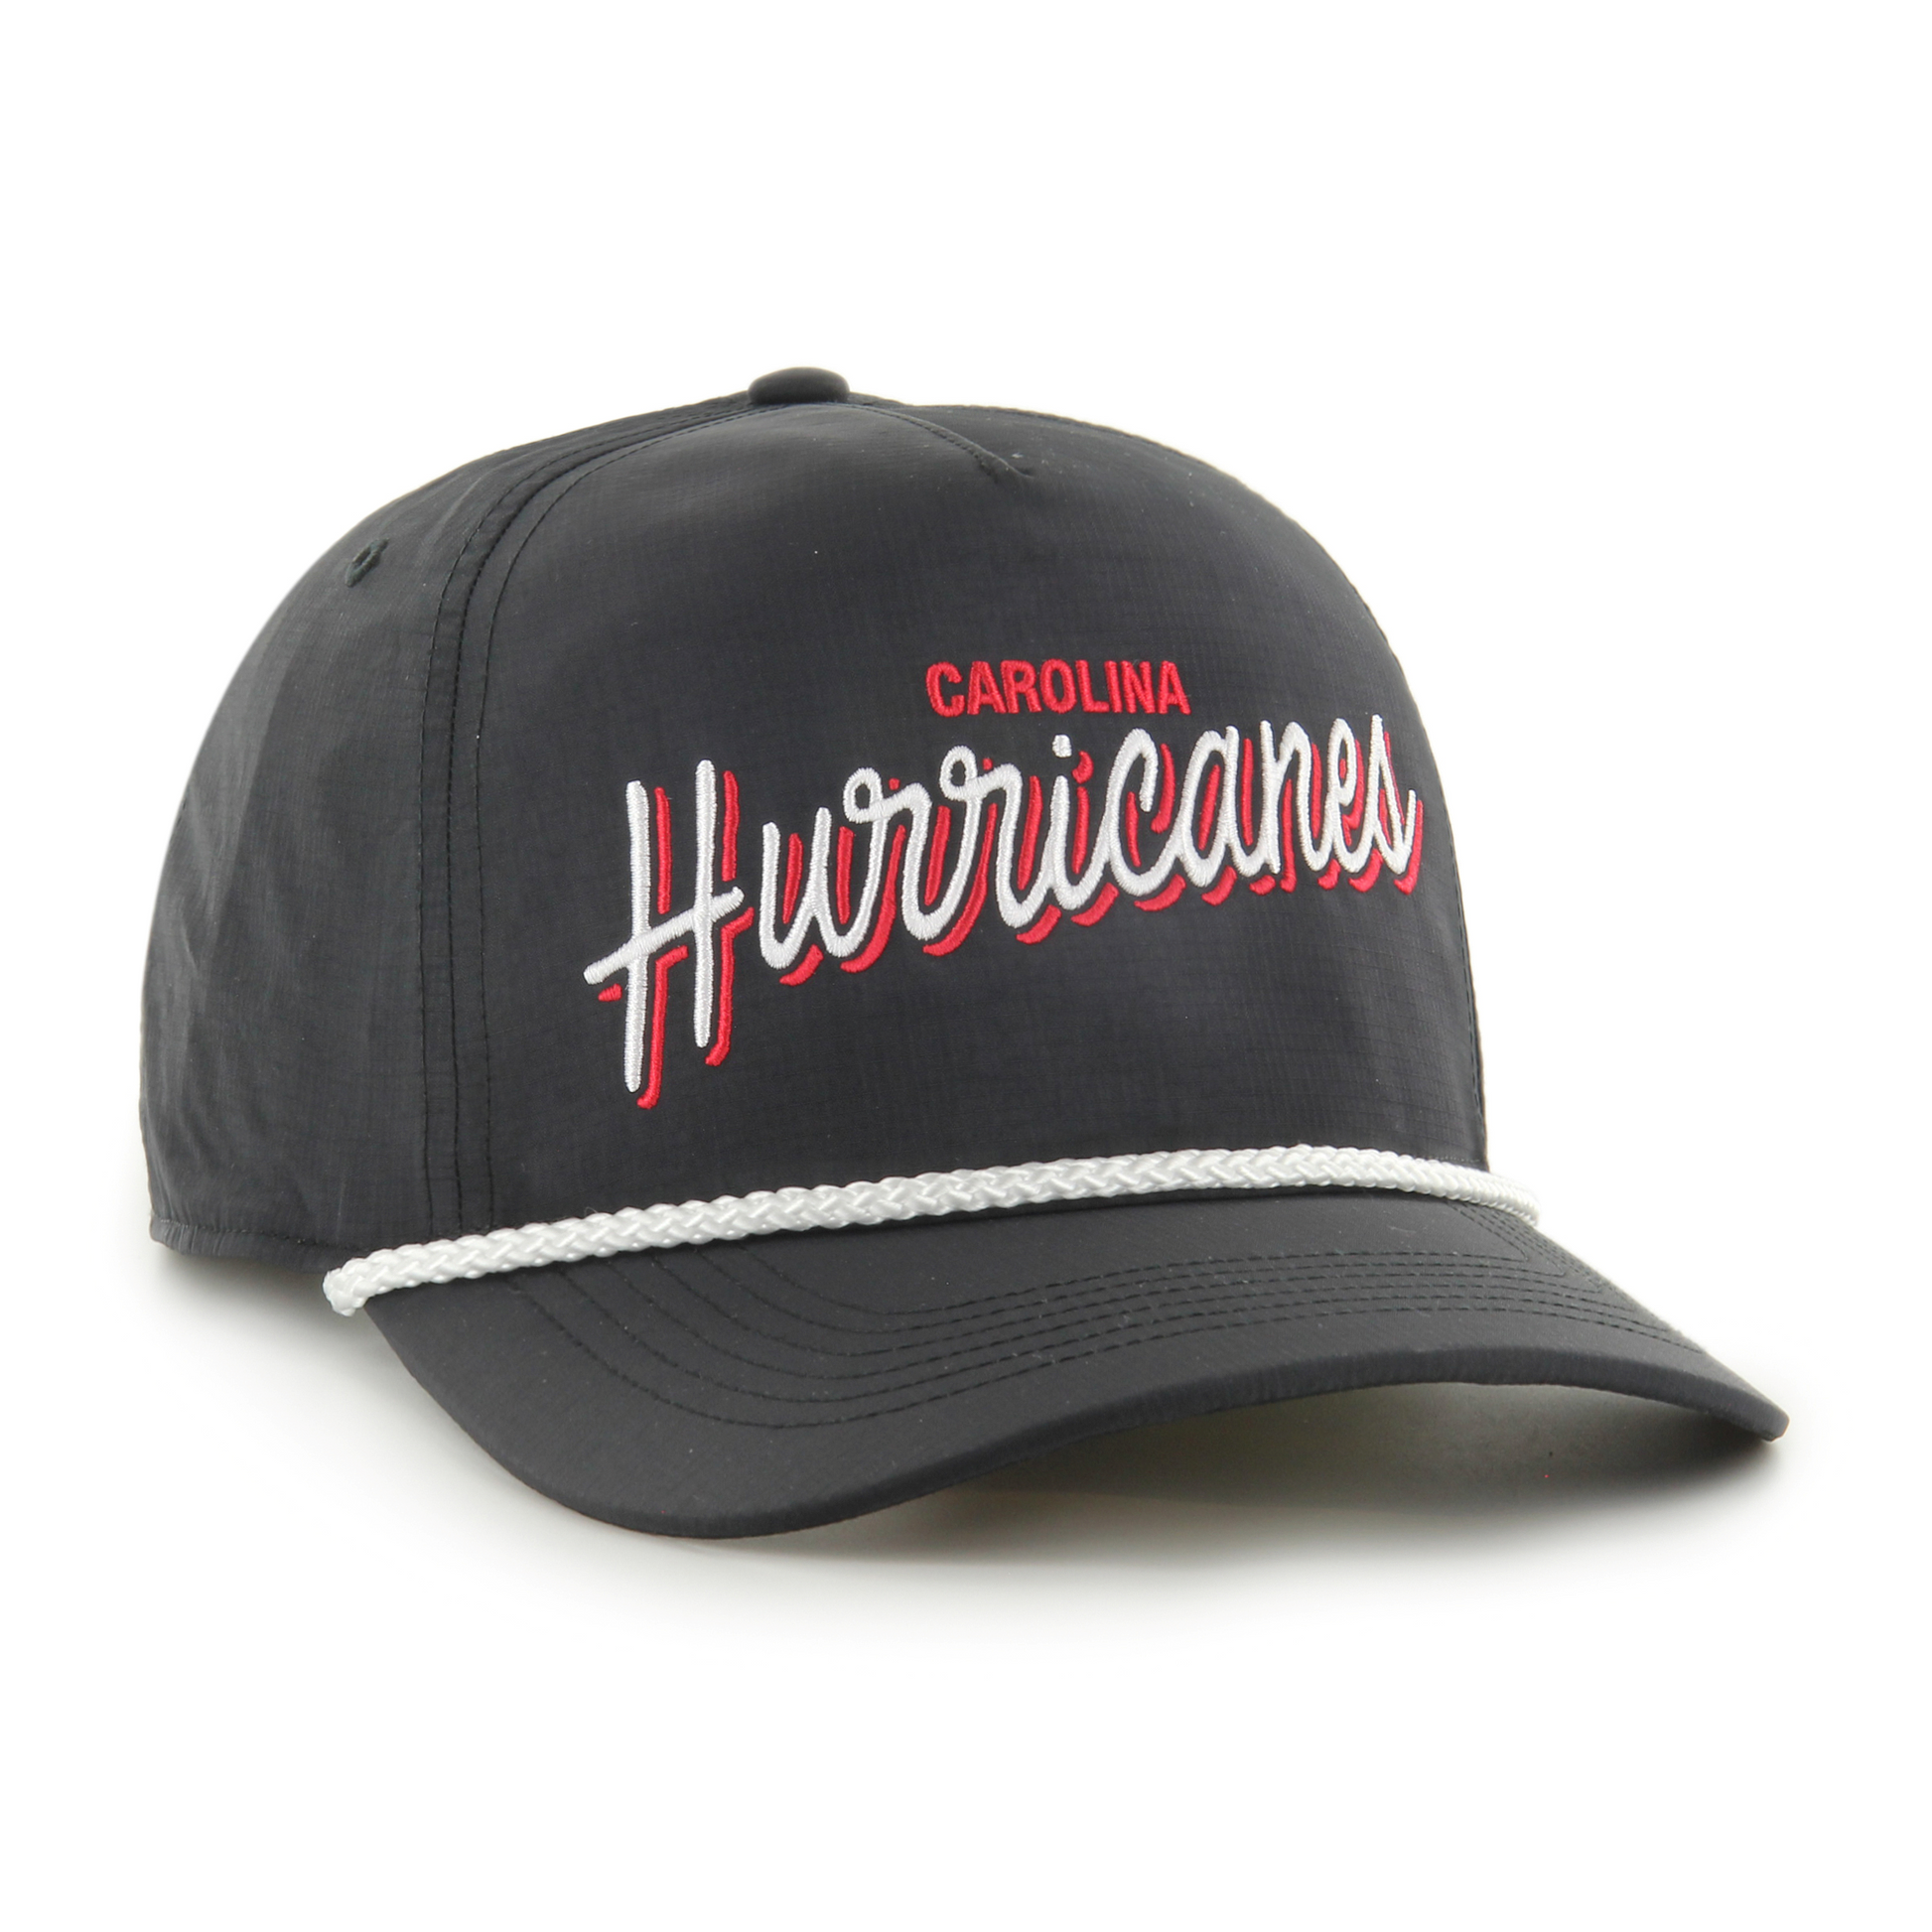 Front: Black Baseball cap with white rope carolina in red print and hurricanes in a larger font script white